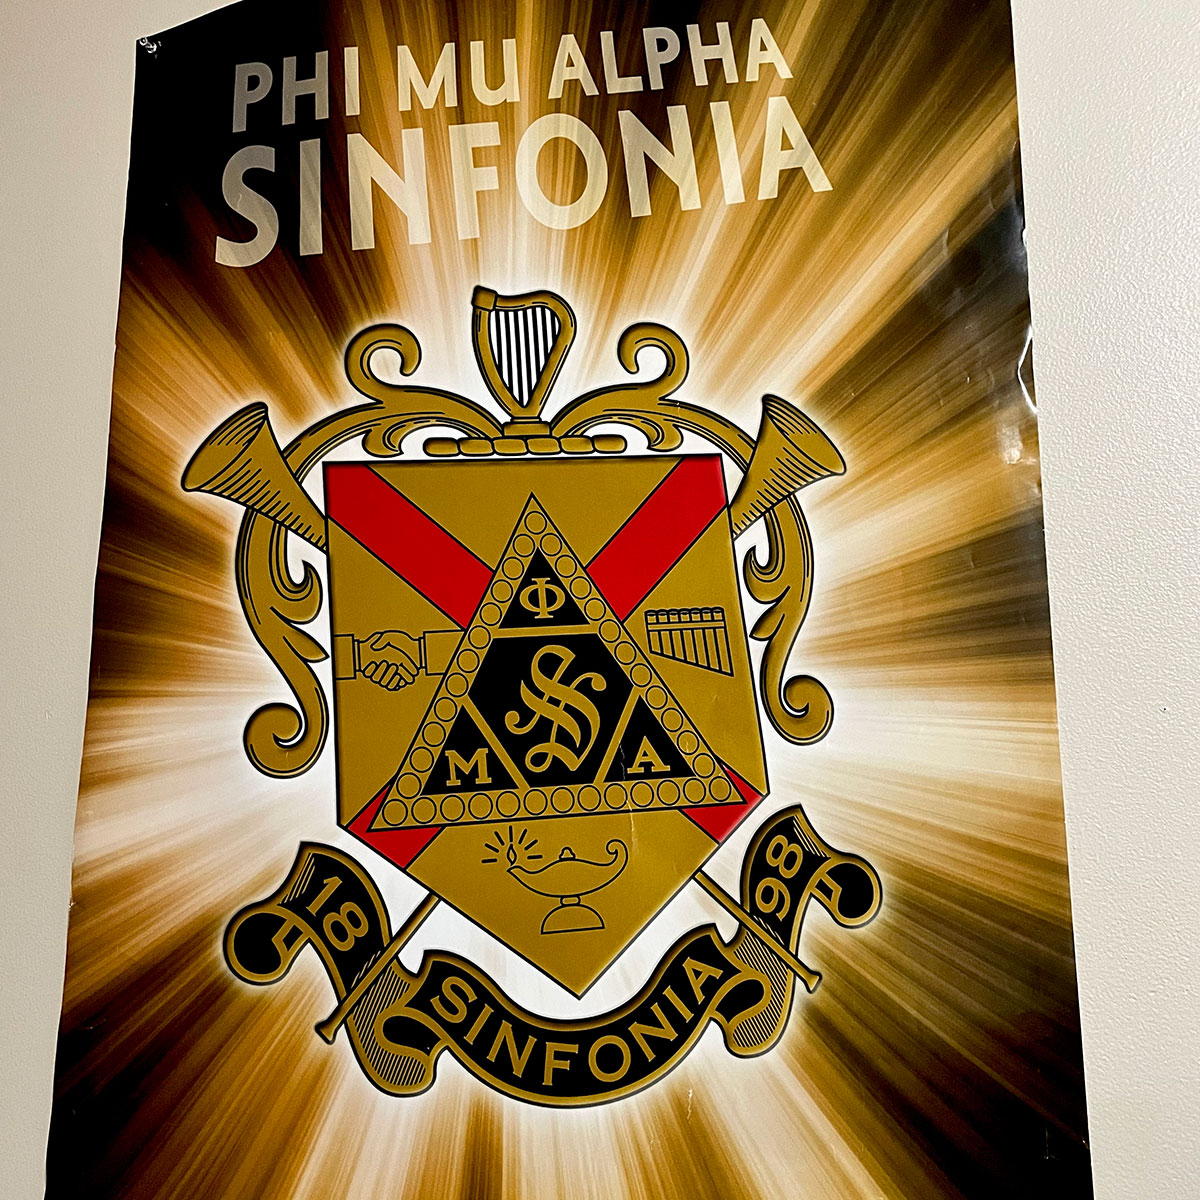 The fraternity's logo on a poster in gold and black colors.